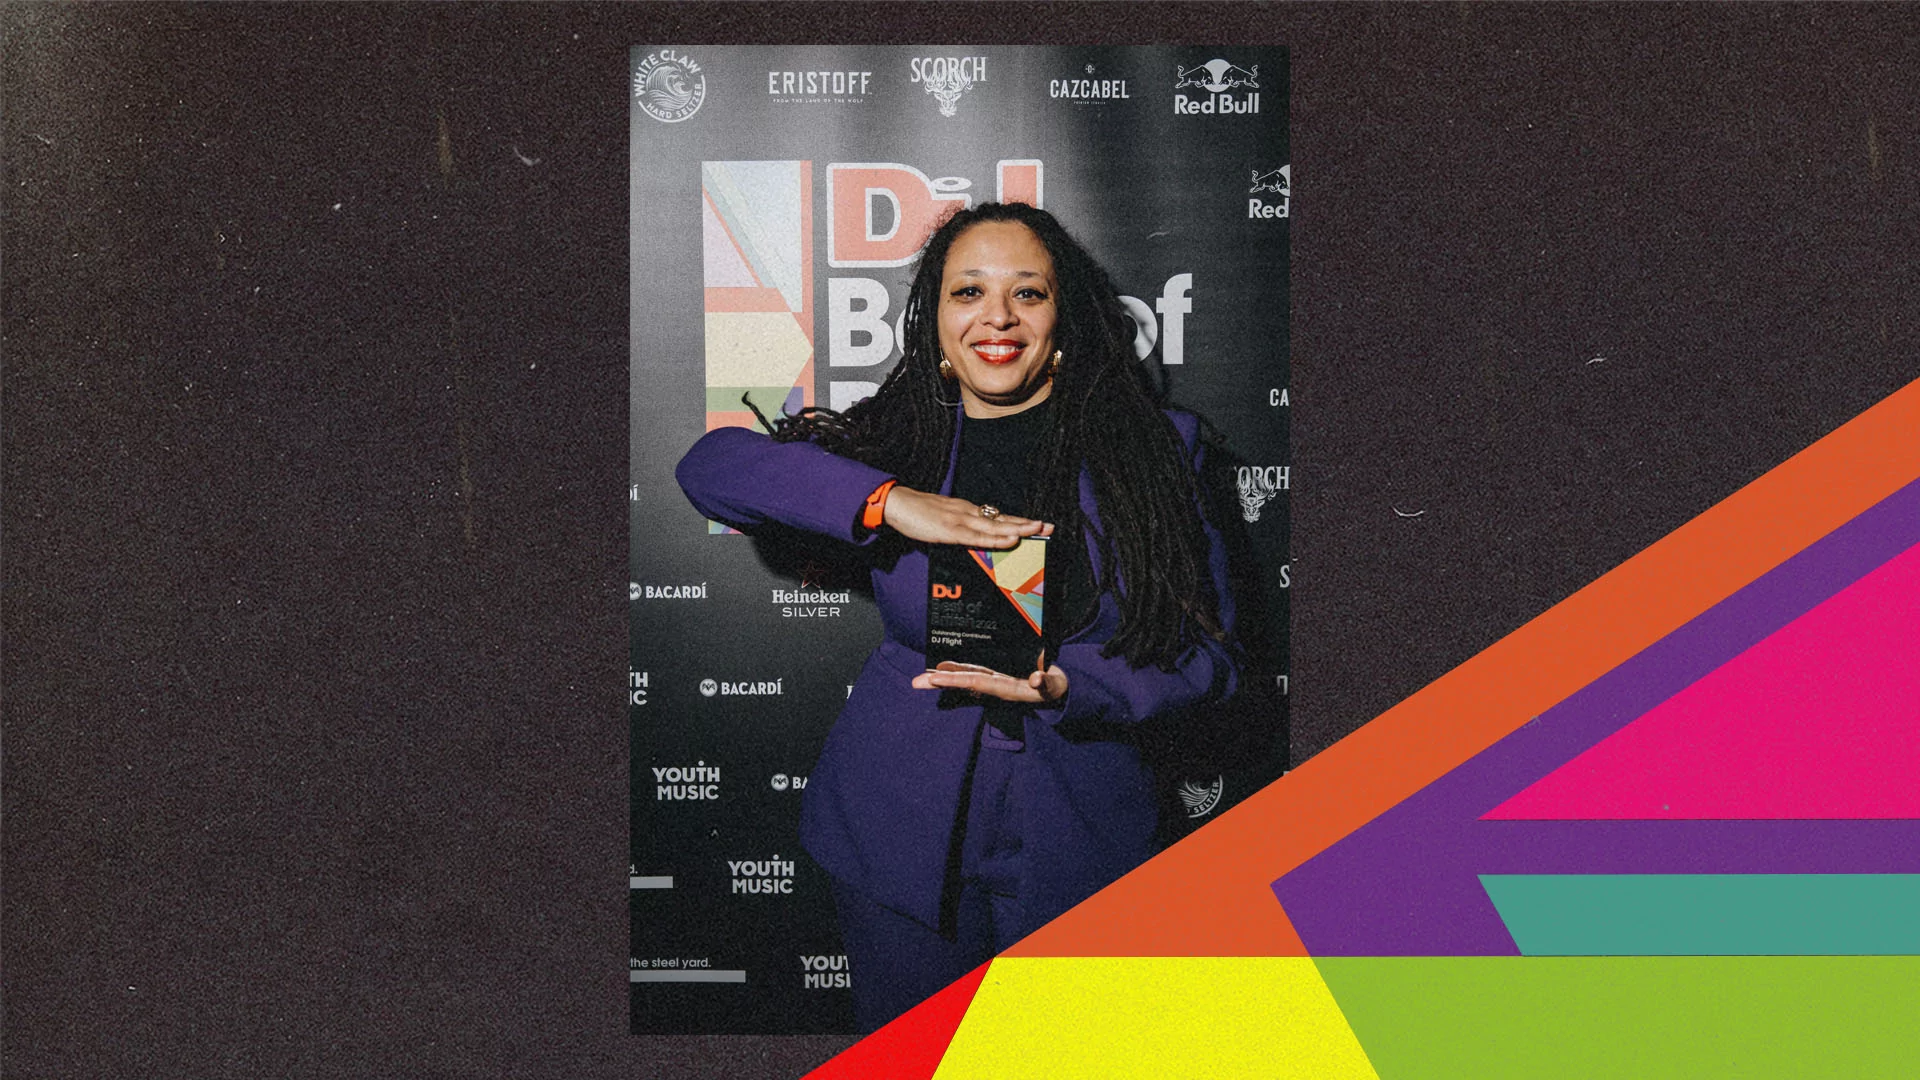 DJ Flight with her Outstanding Contribution at the DJ Mag Best of British Awards